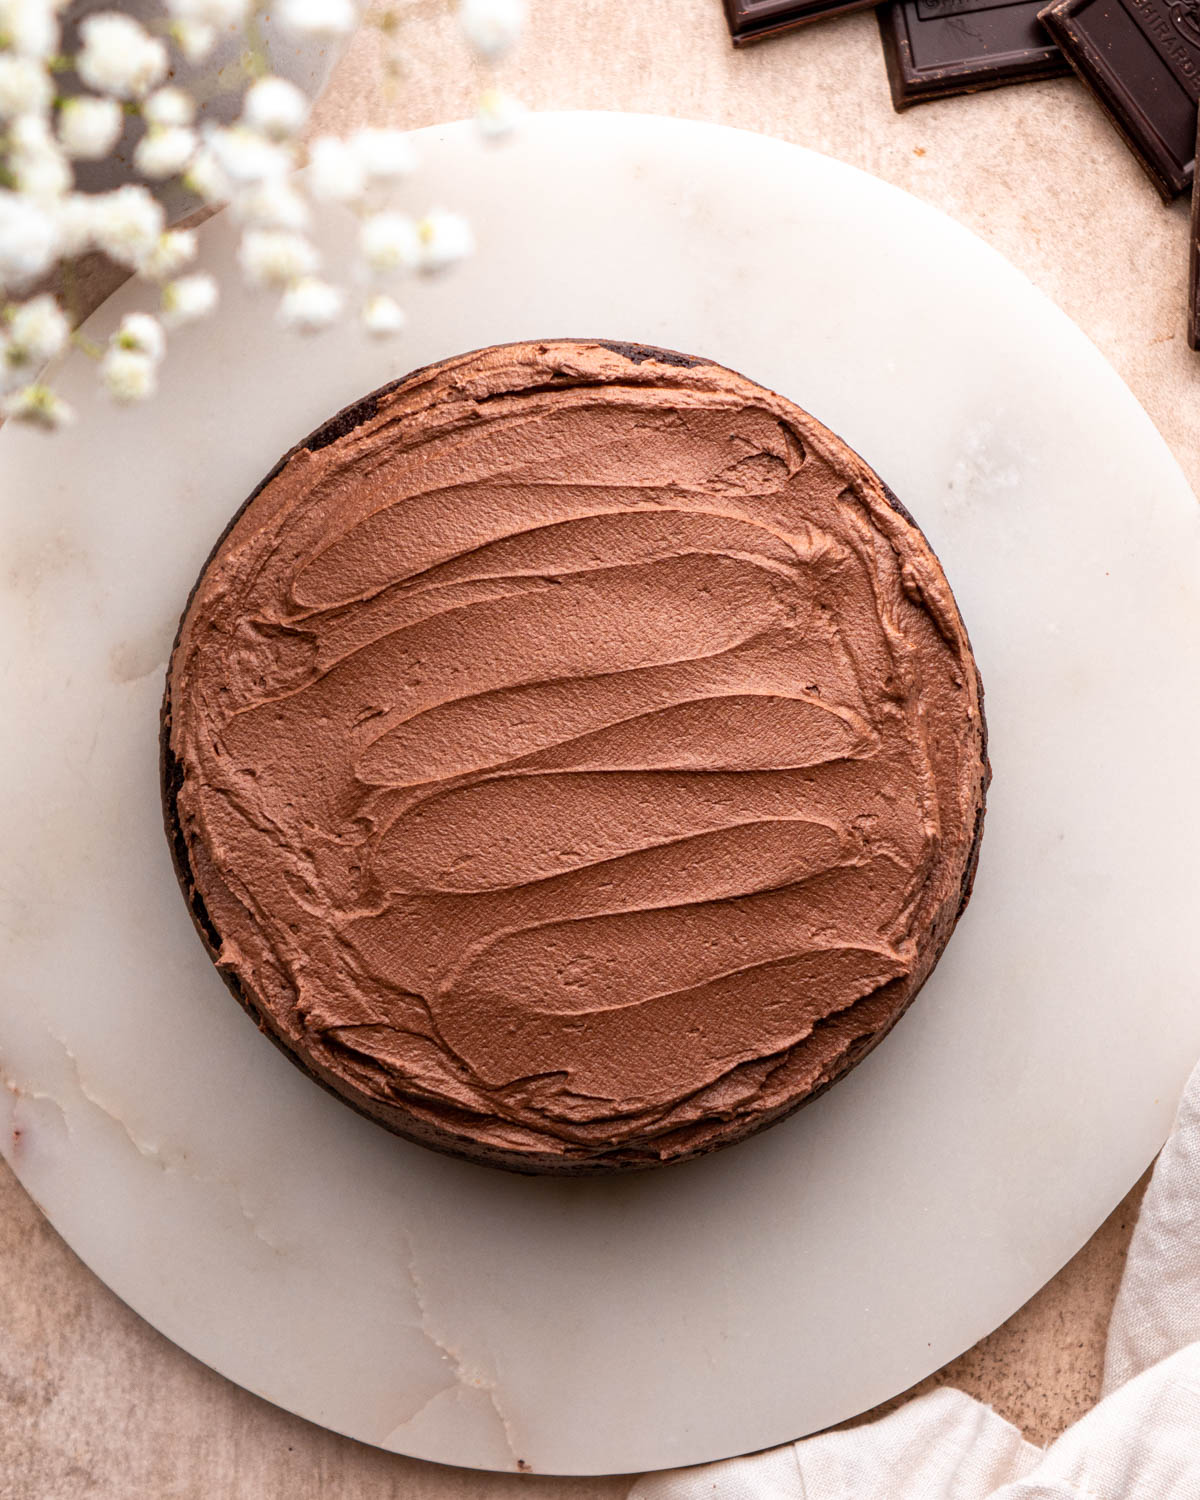 chocolate frosting spread on cake layer